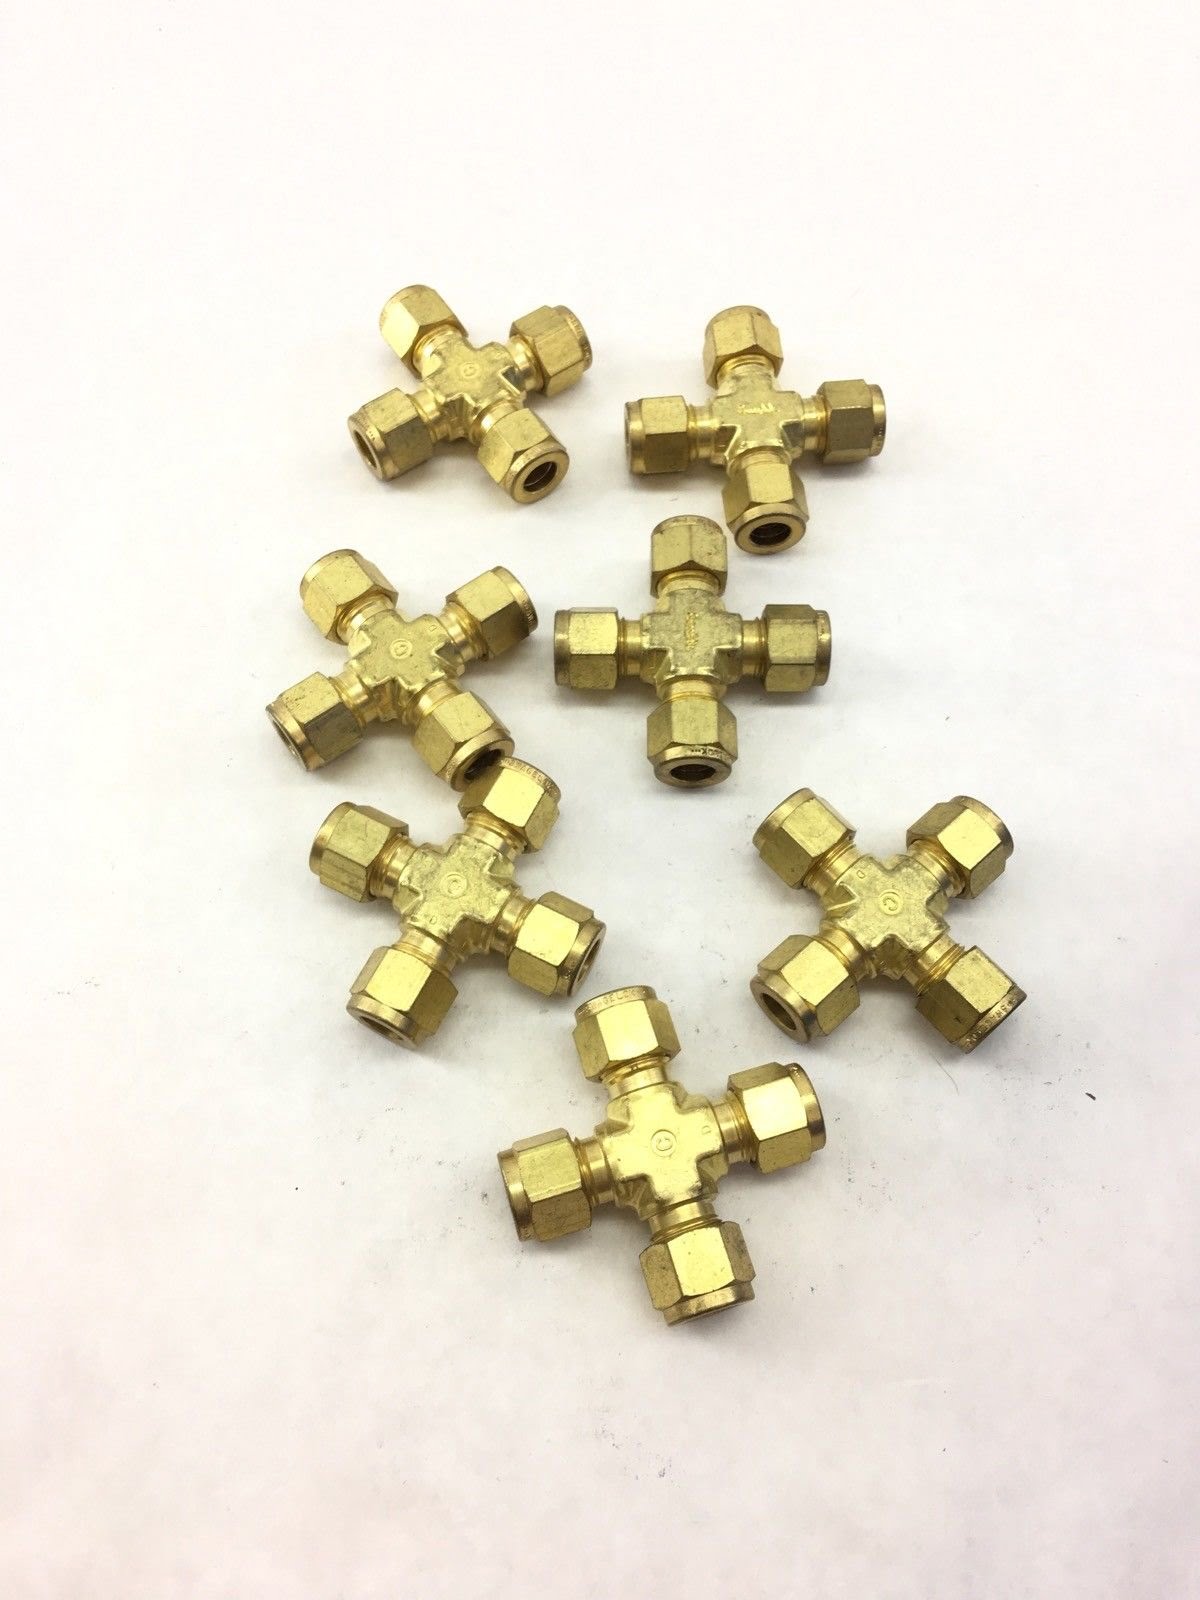 LOT OF 7 SWAGELOK BRASS 3/8 TUBE UNION CROSS CONNECTOR FITTING, (A706)